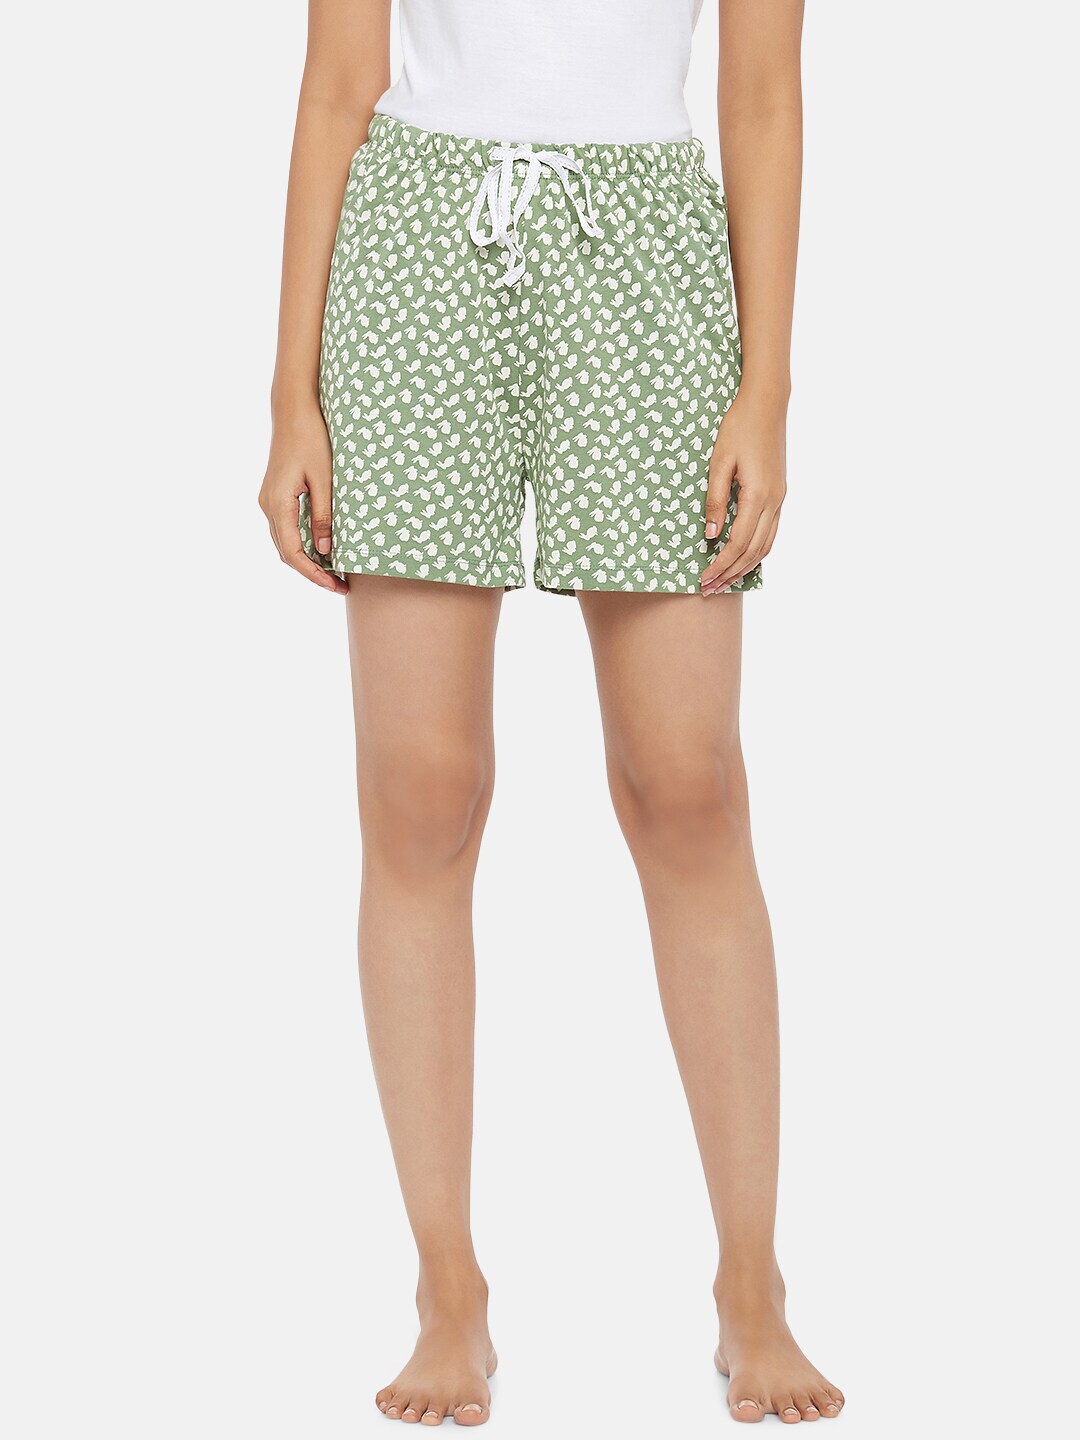 Dreamz by Pantaloons Women Green & White Printed Pure Cotton Lounge Shorts Price in India